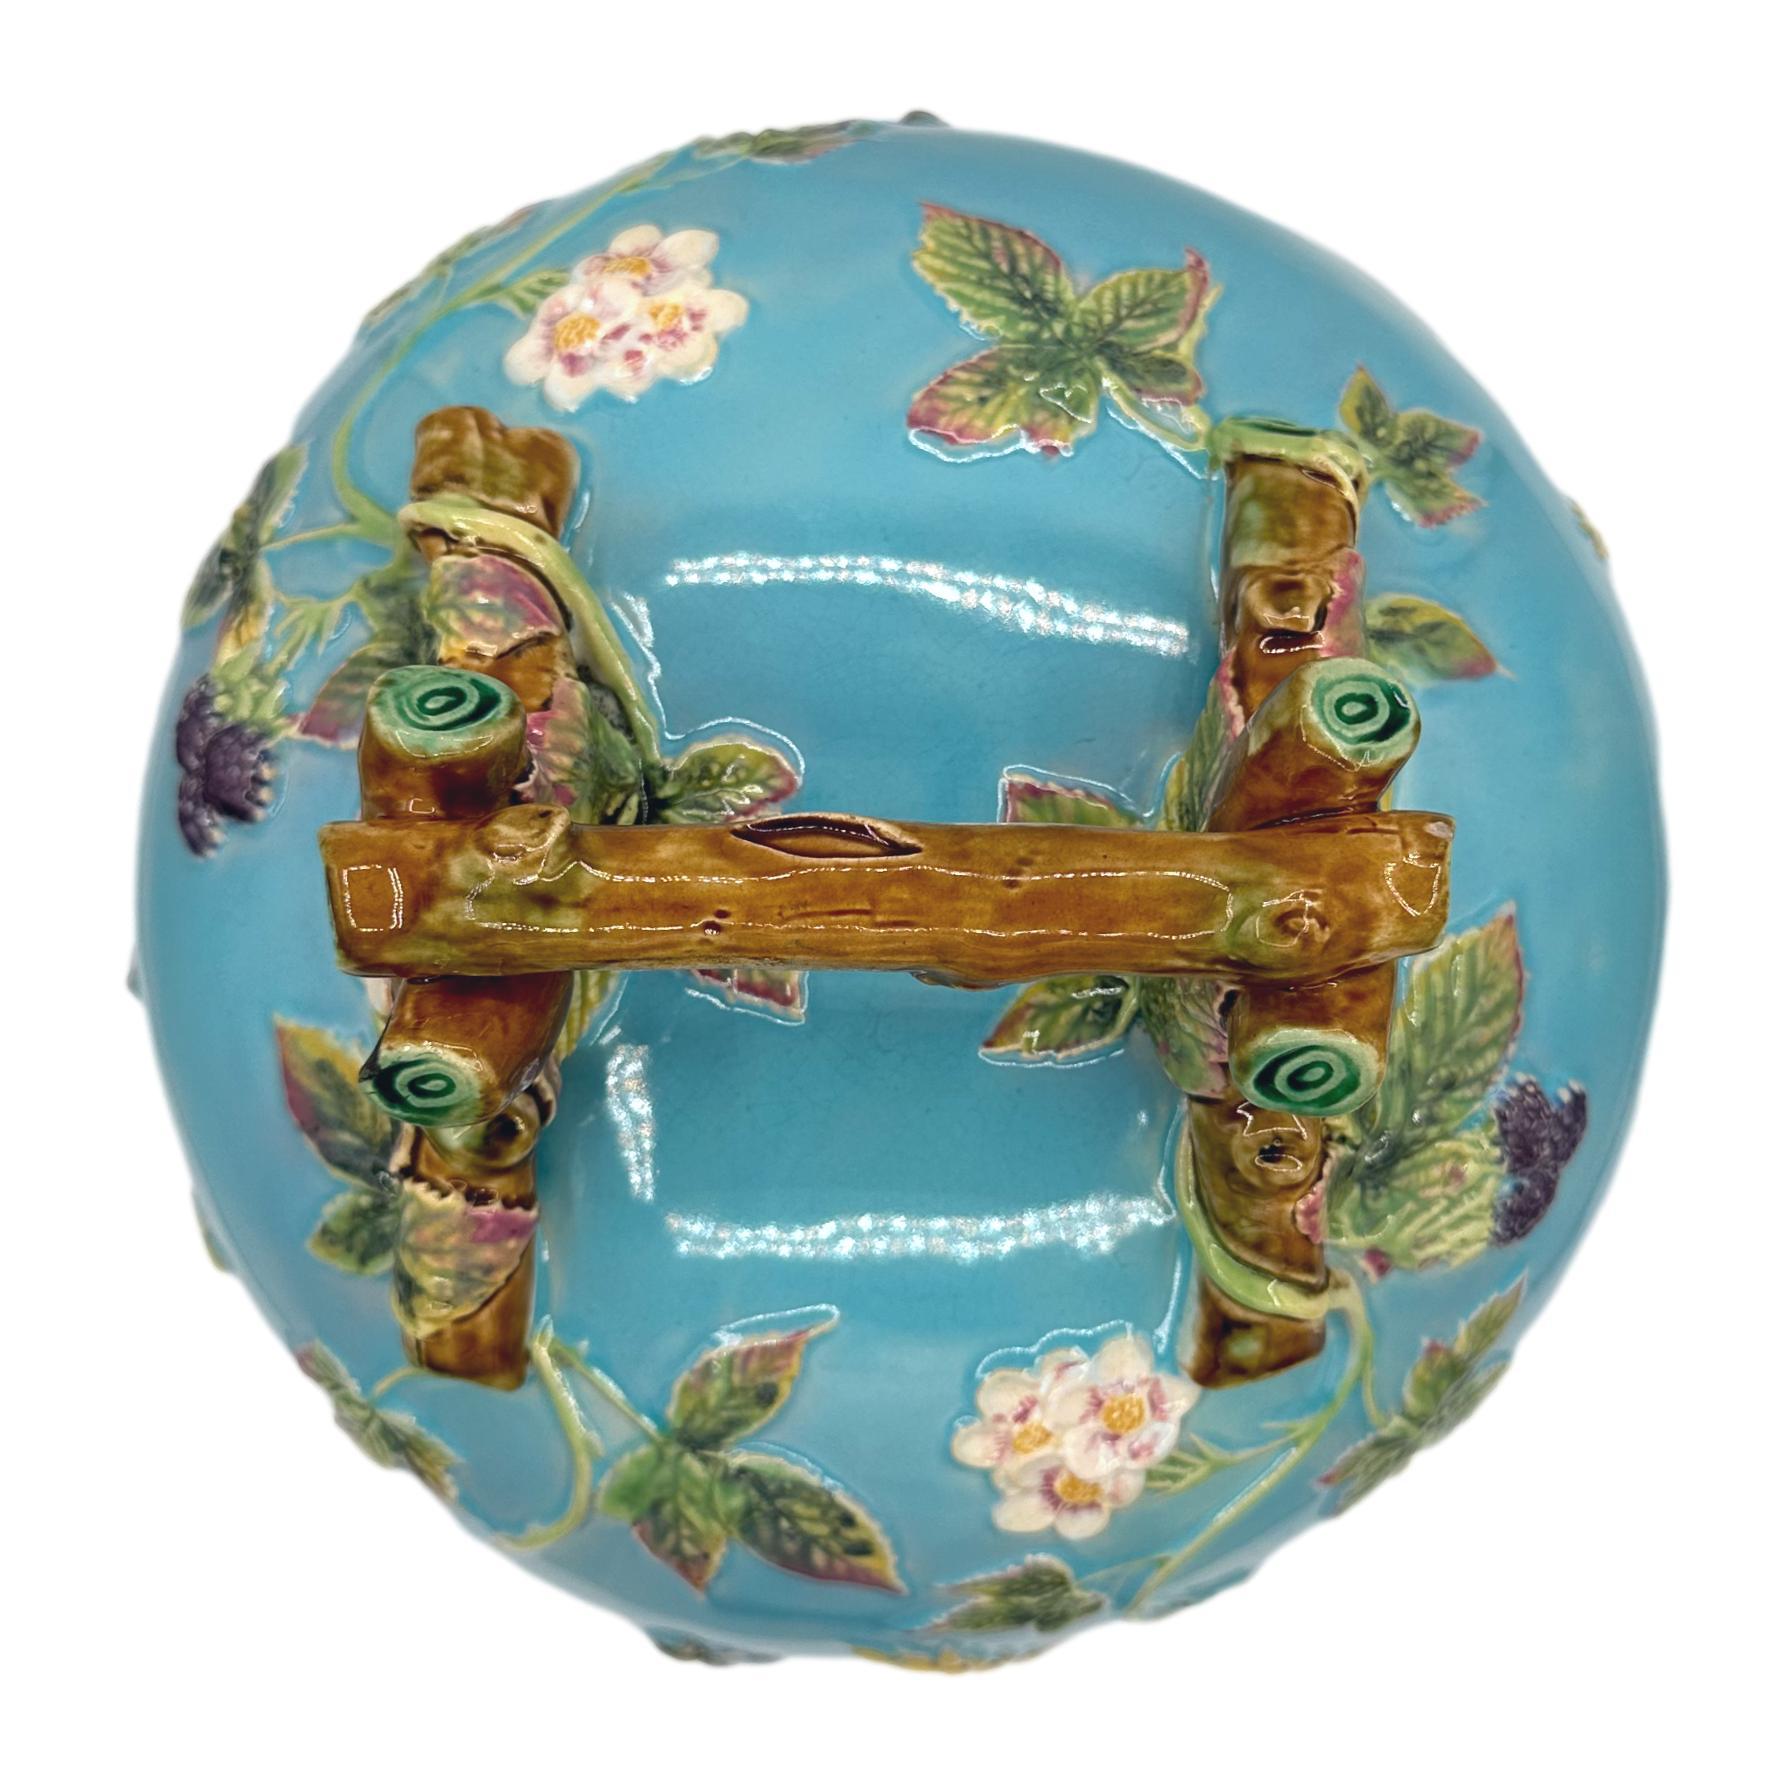 A Large George Jones Majolica Cheese Bell with Daisys, Bees and Fence, ca. 1878 For Sale 2